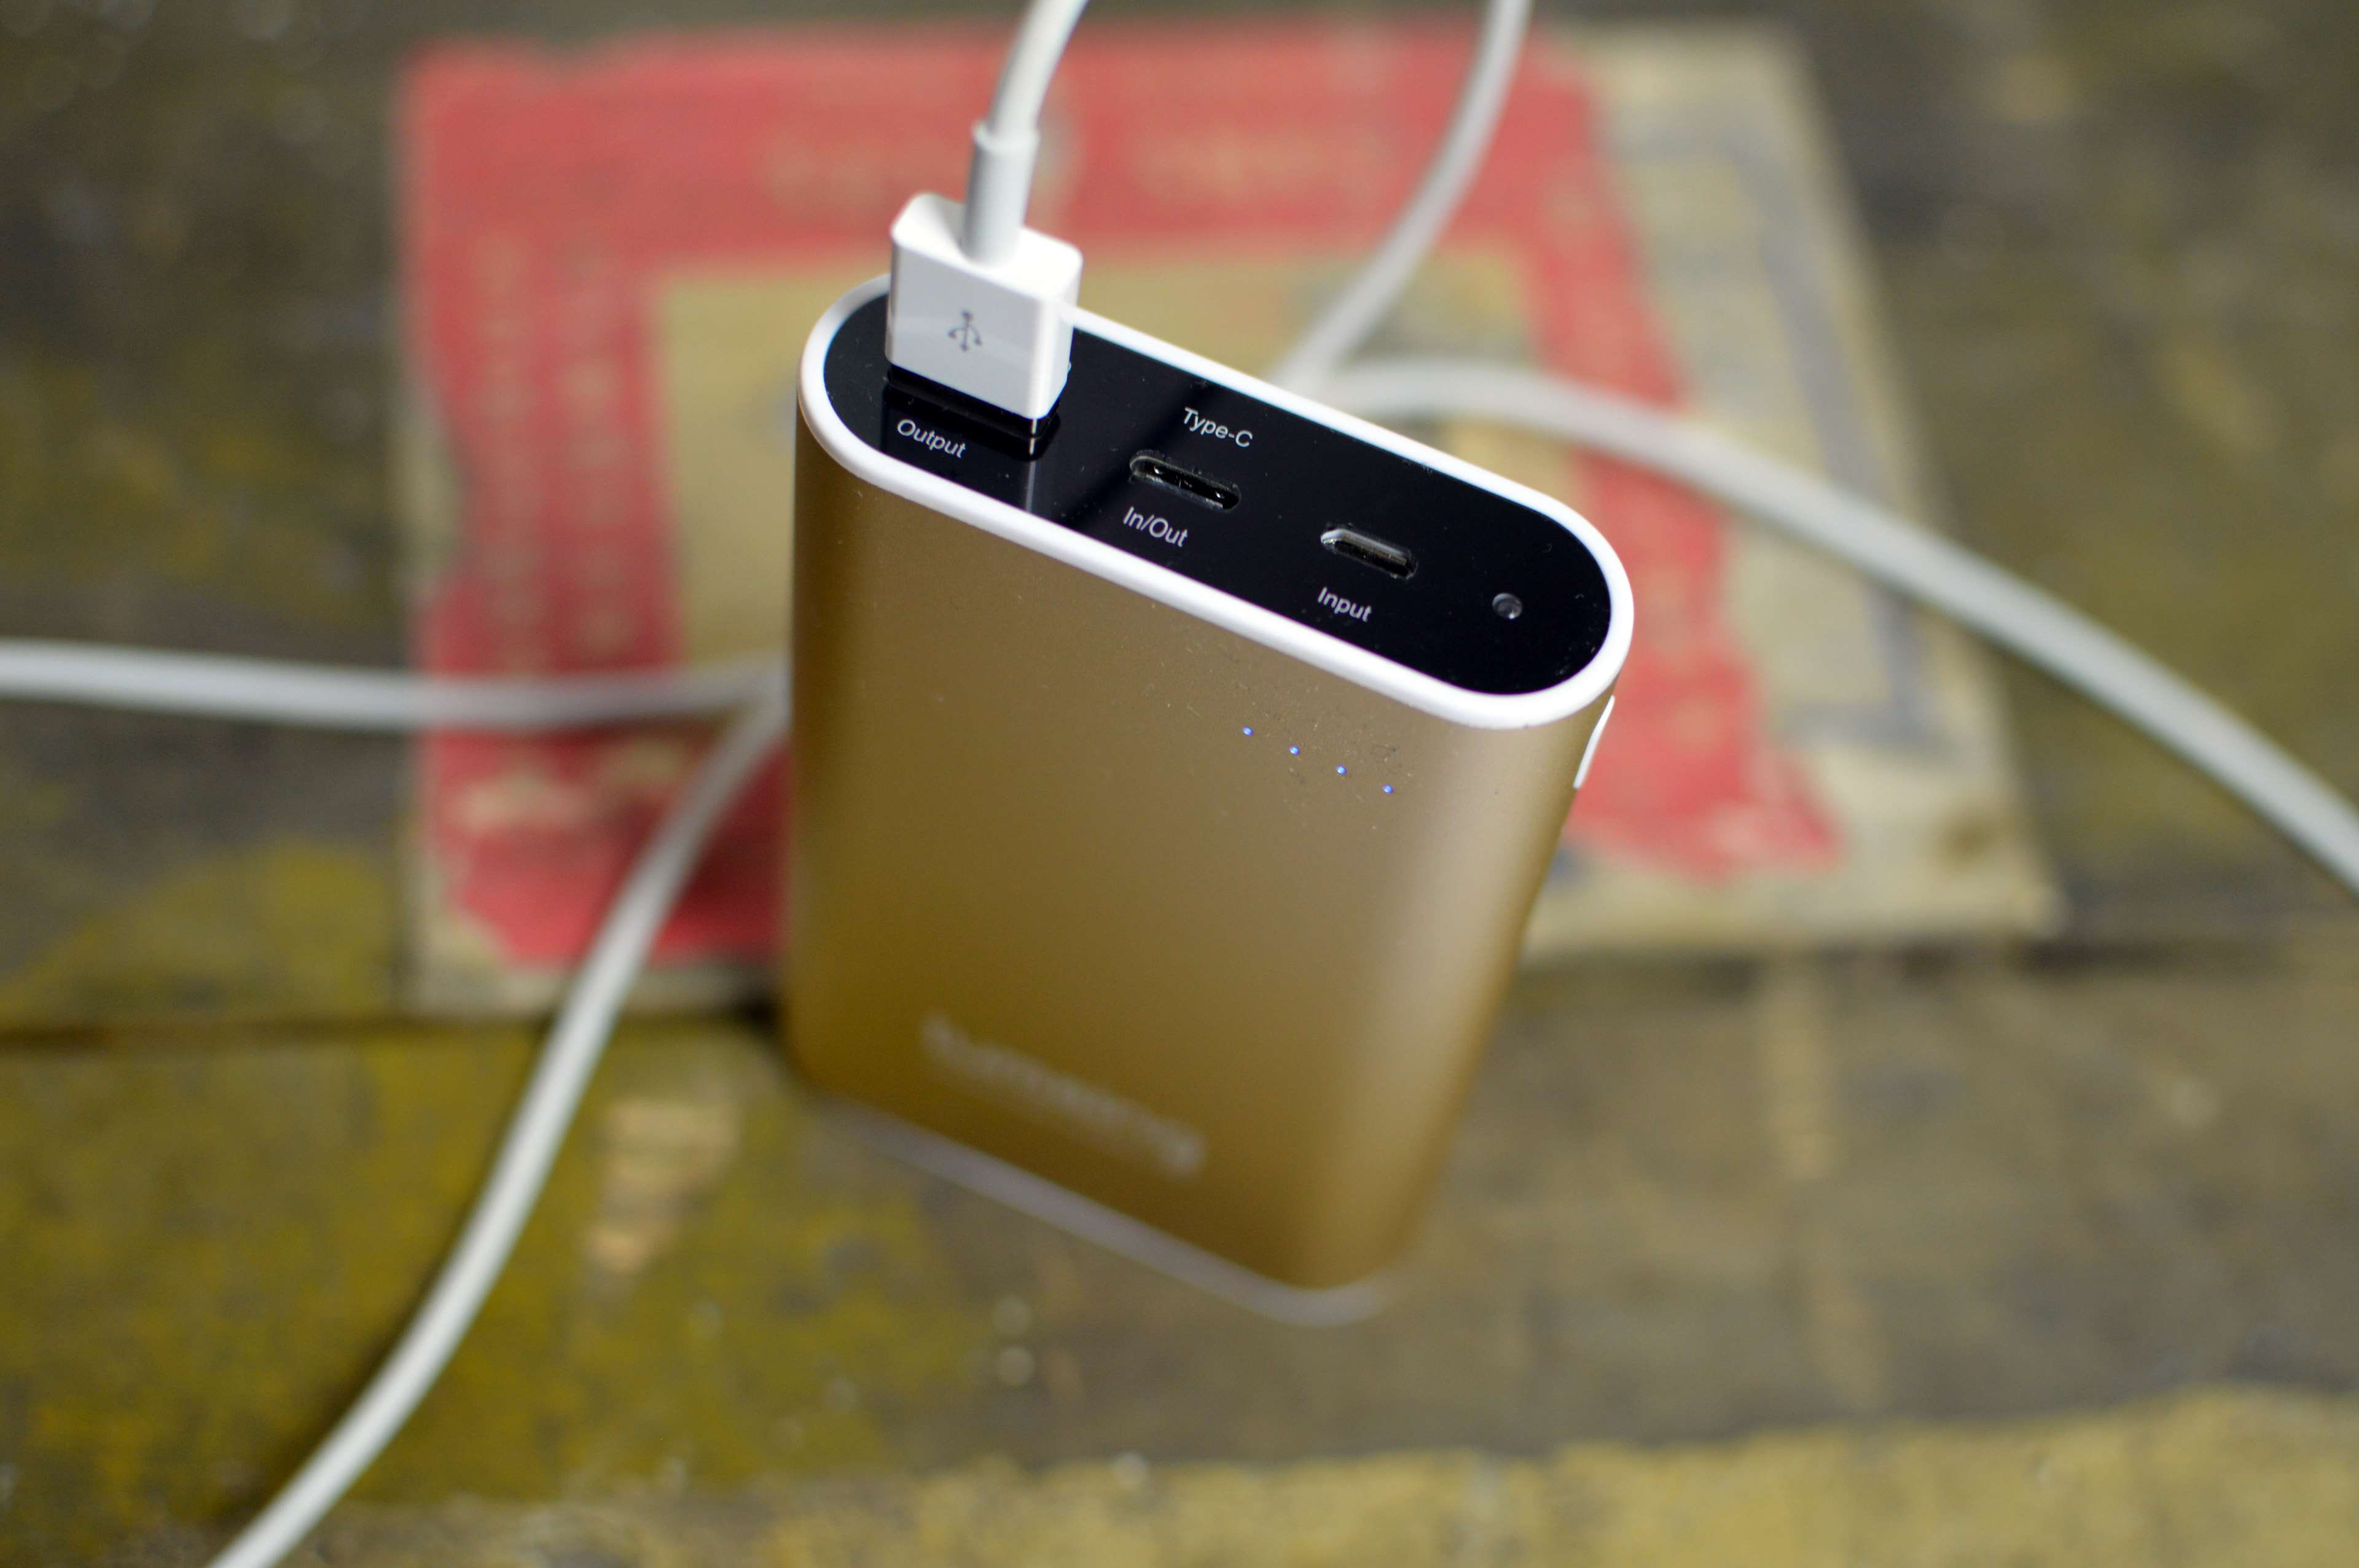 battery, bronze, cable charger, colored, energy, golden, ipad